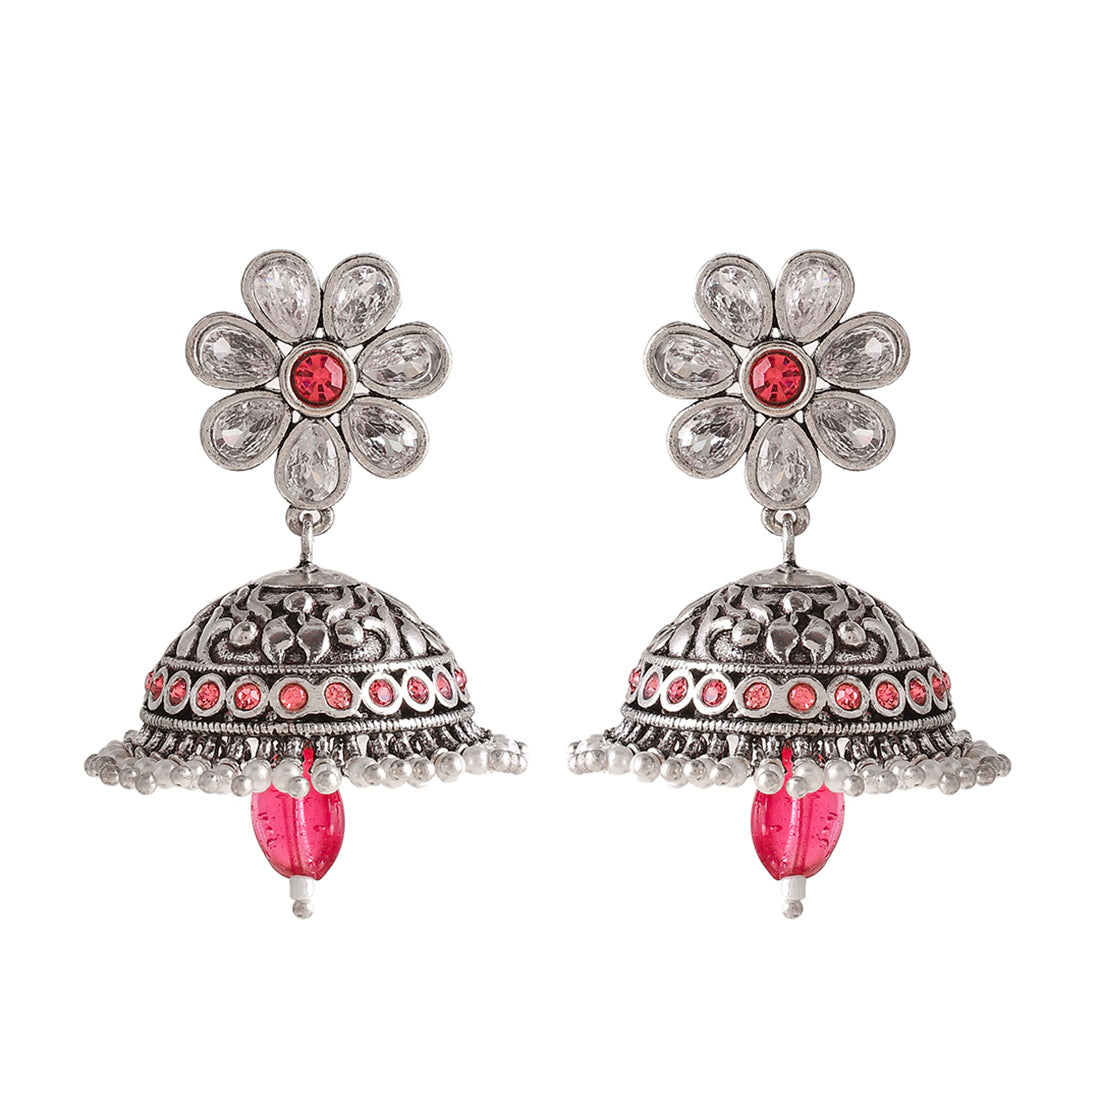 Women's Abharan White Stones And Pearls Floral Jhumka Earrings - Voylla